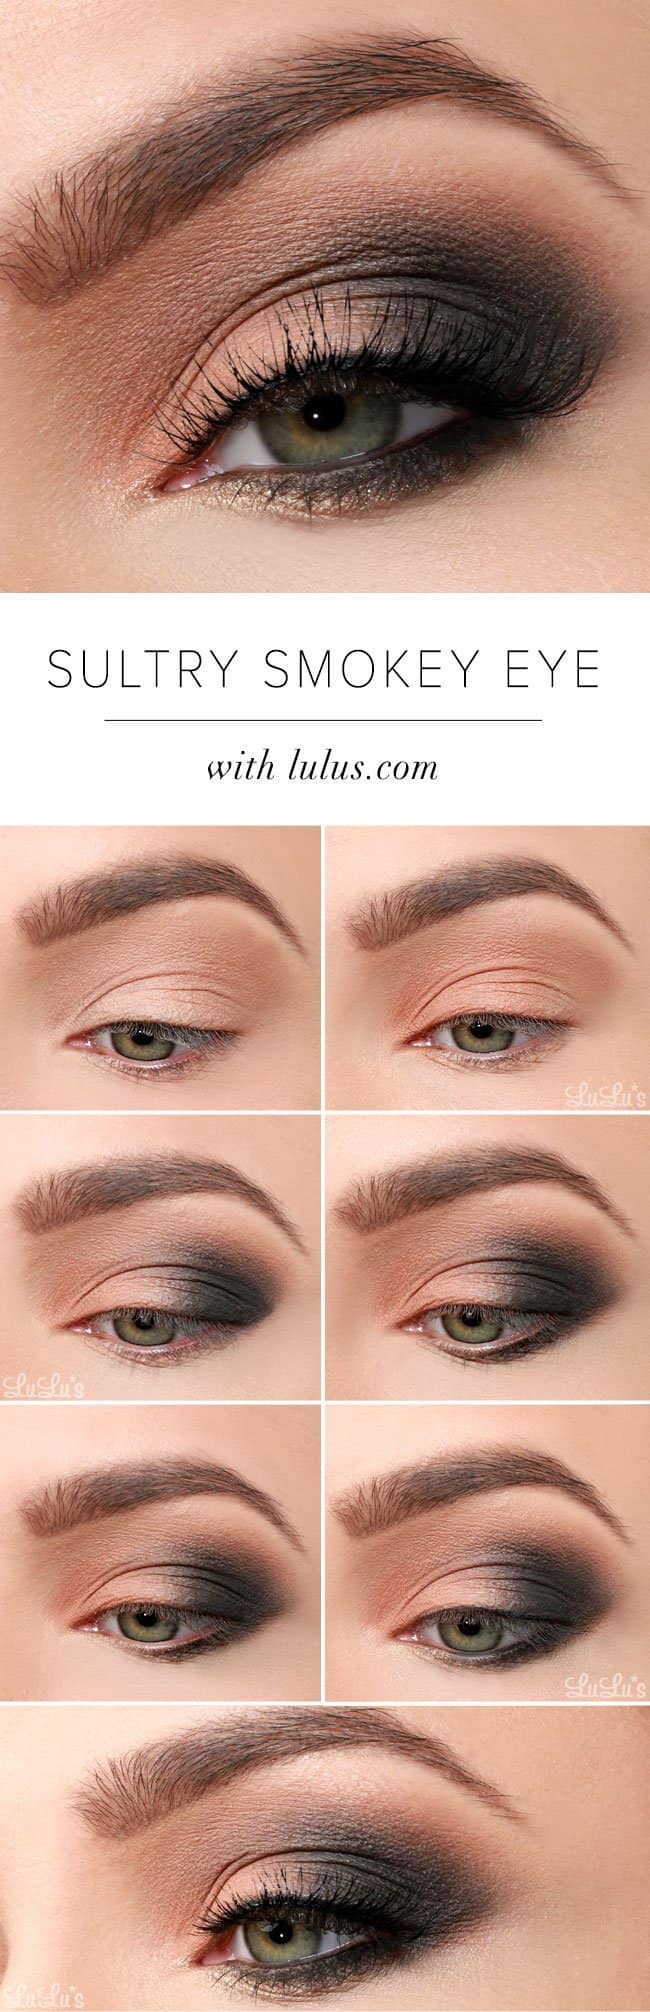 15 smokey eye tutorials - step by step guide to perfect hollywood makeup